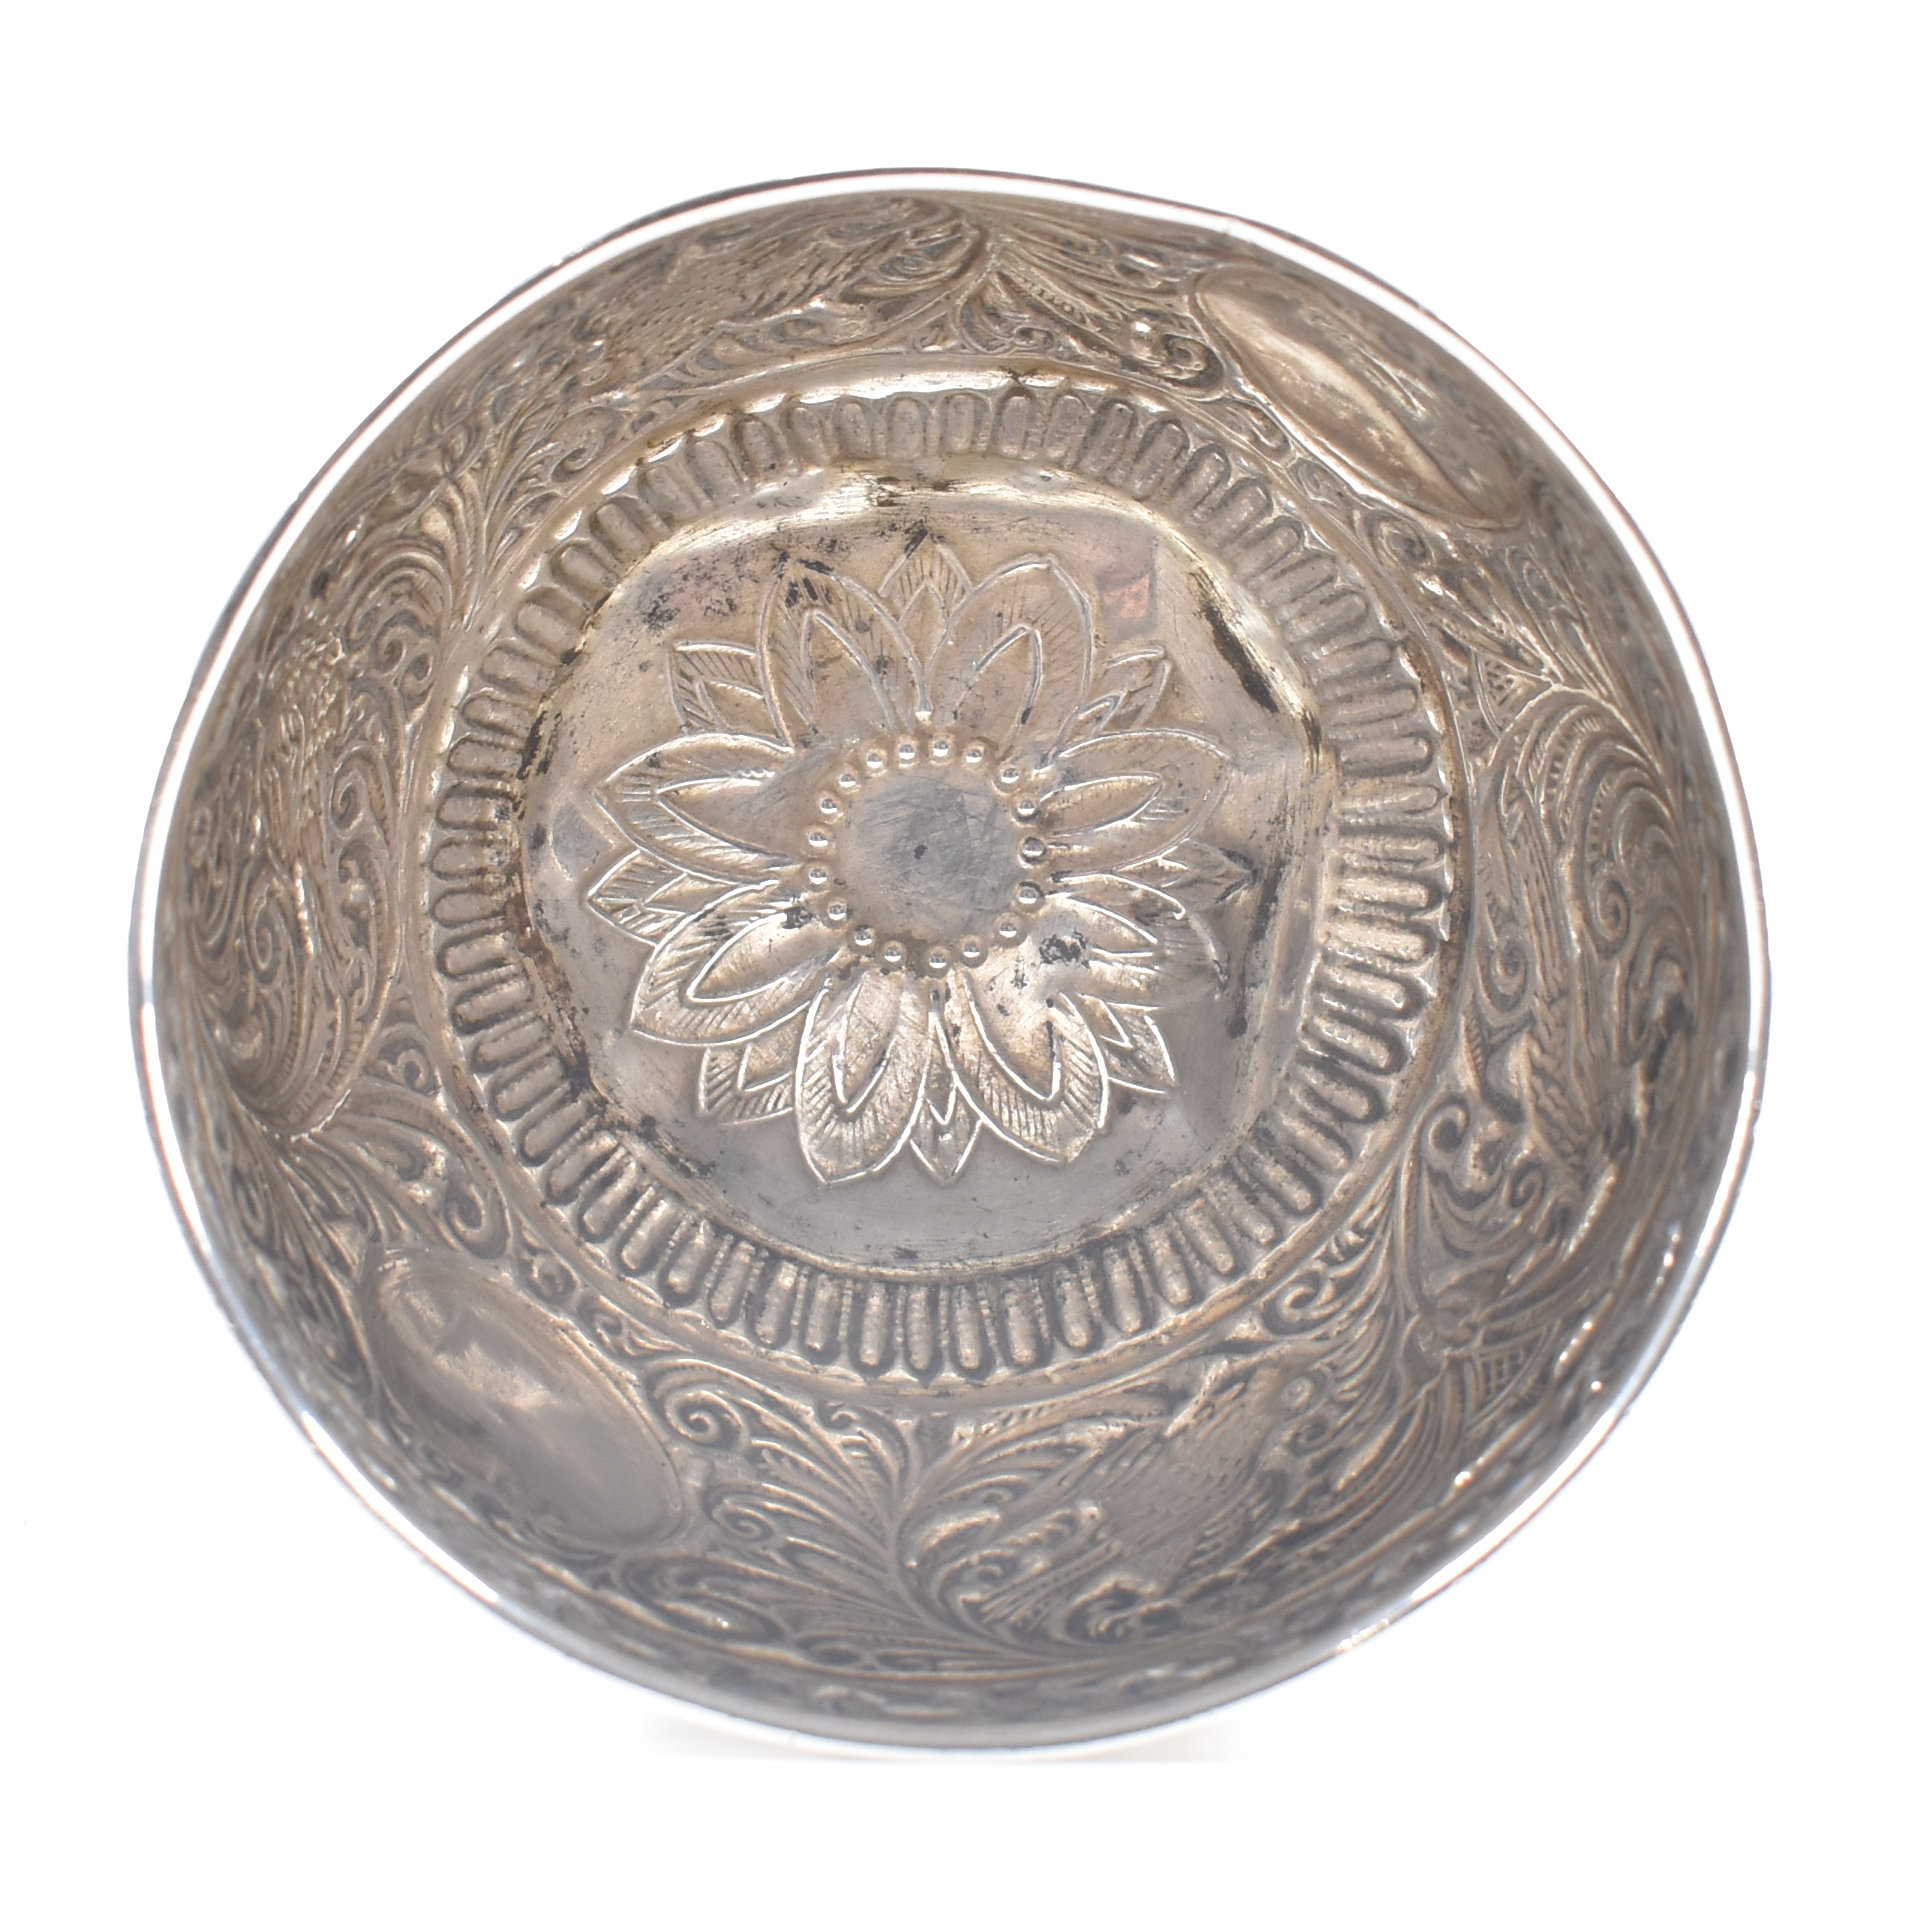 VICTORIAN HALLMARKED SILVER REPOUSSÉ BOWL - Image 7 of 7